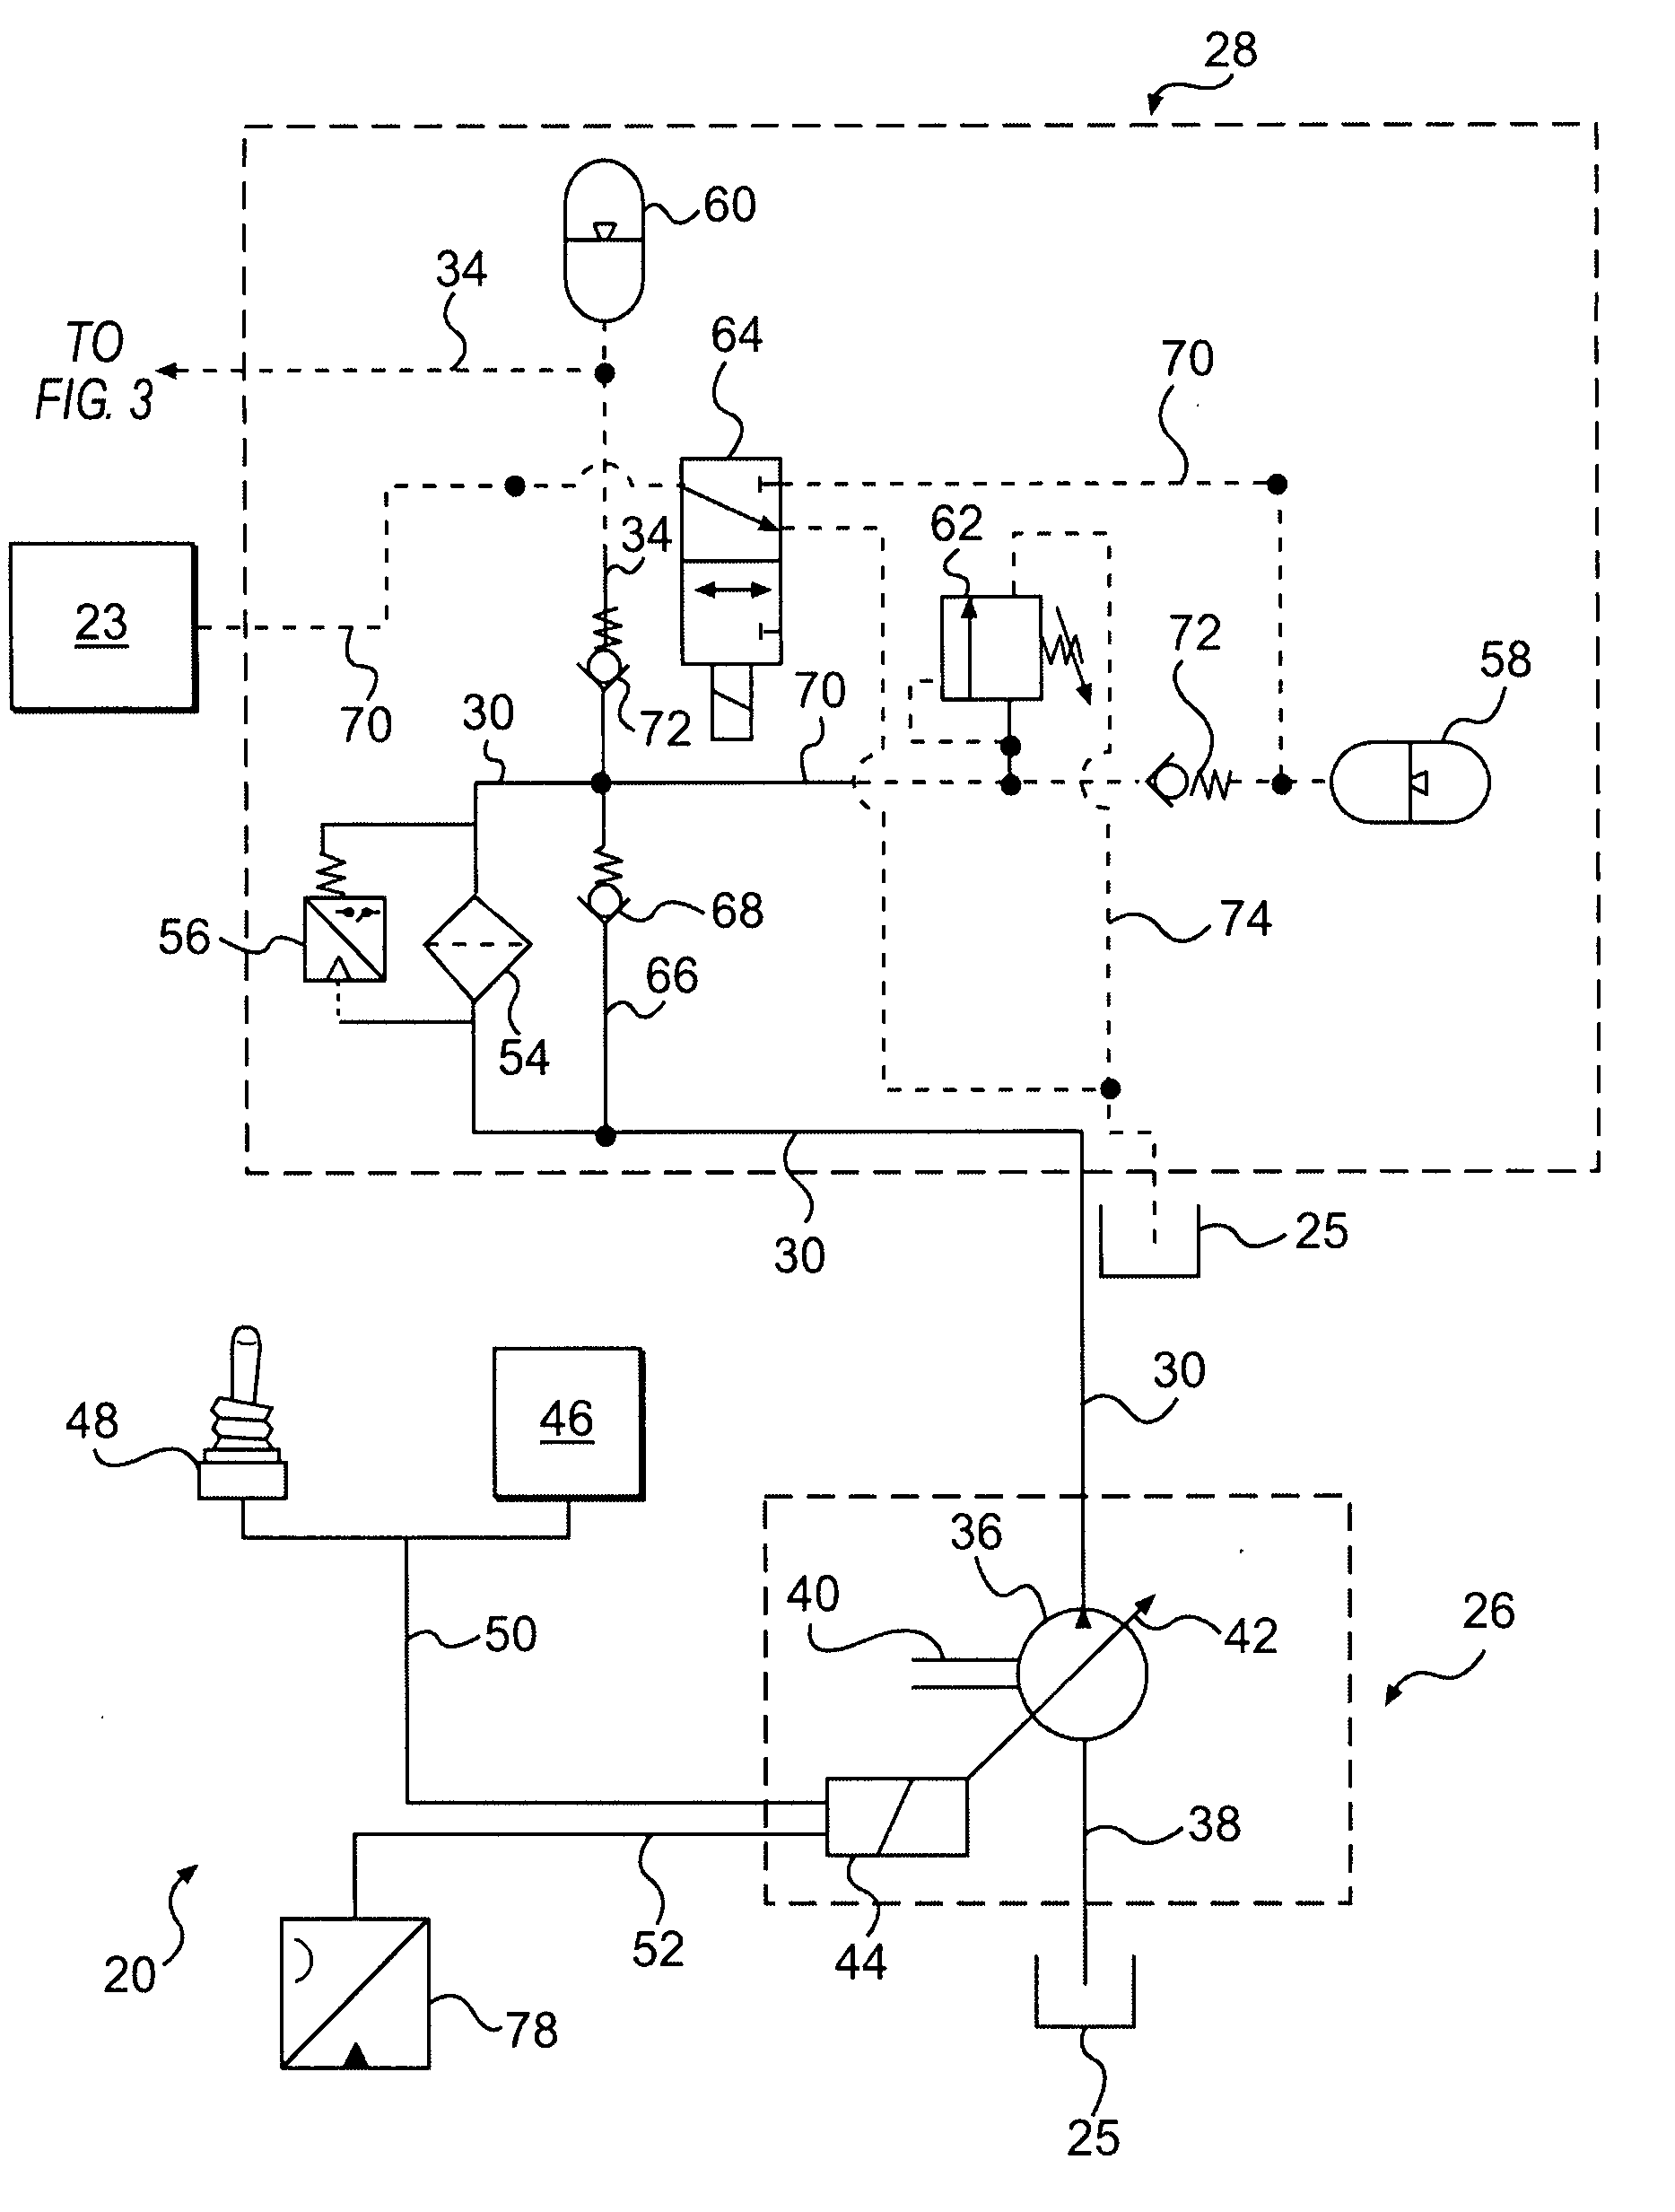 Hydrostatic drive system with variable charge pump